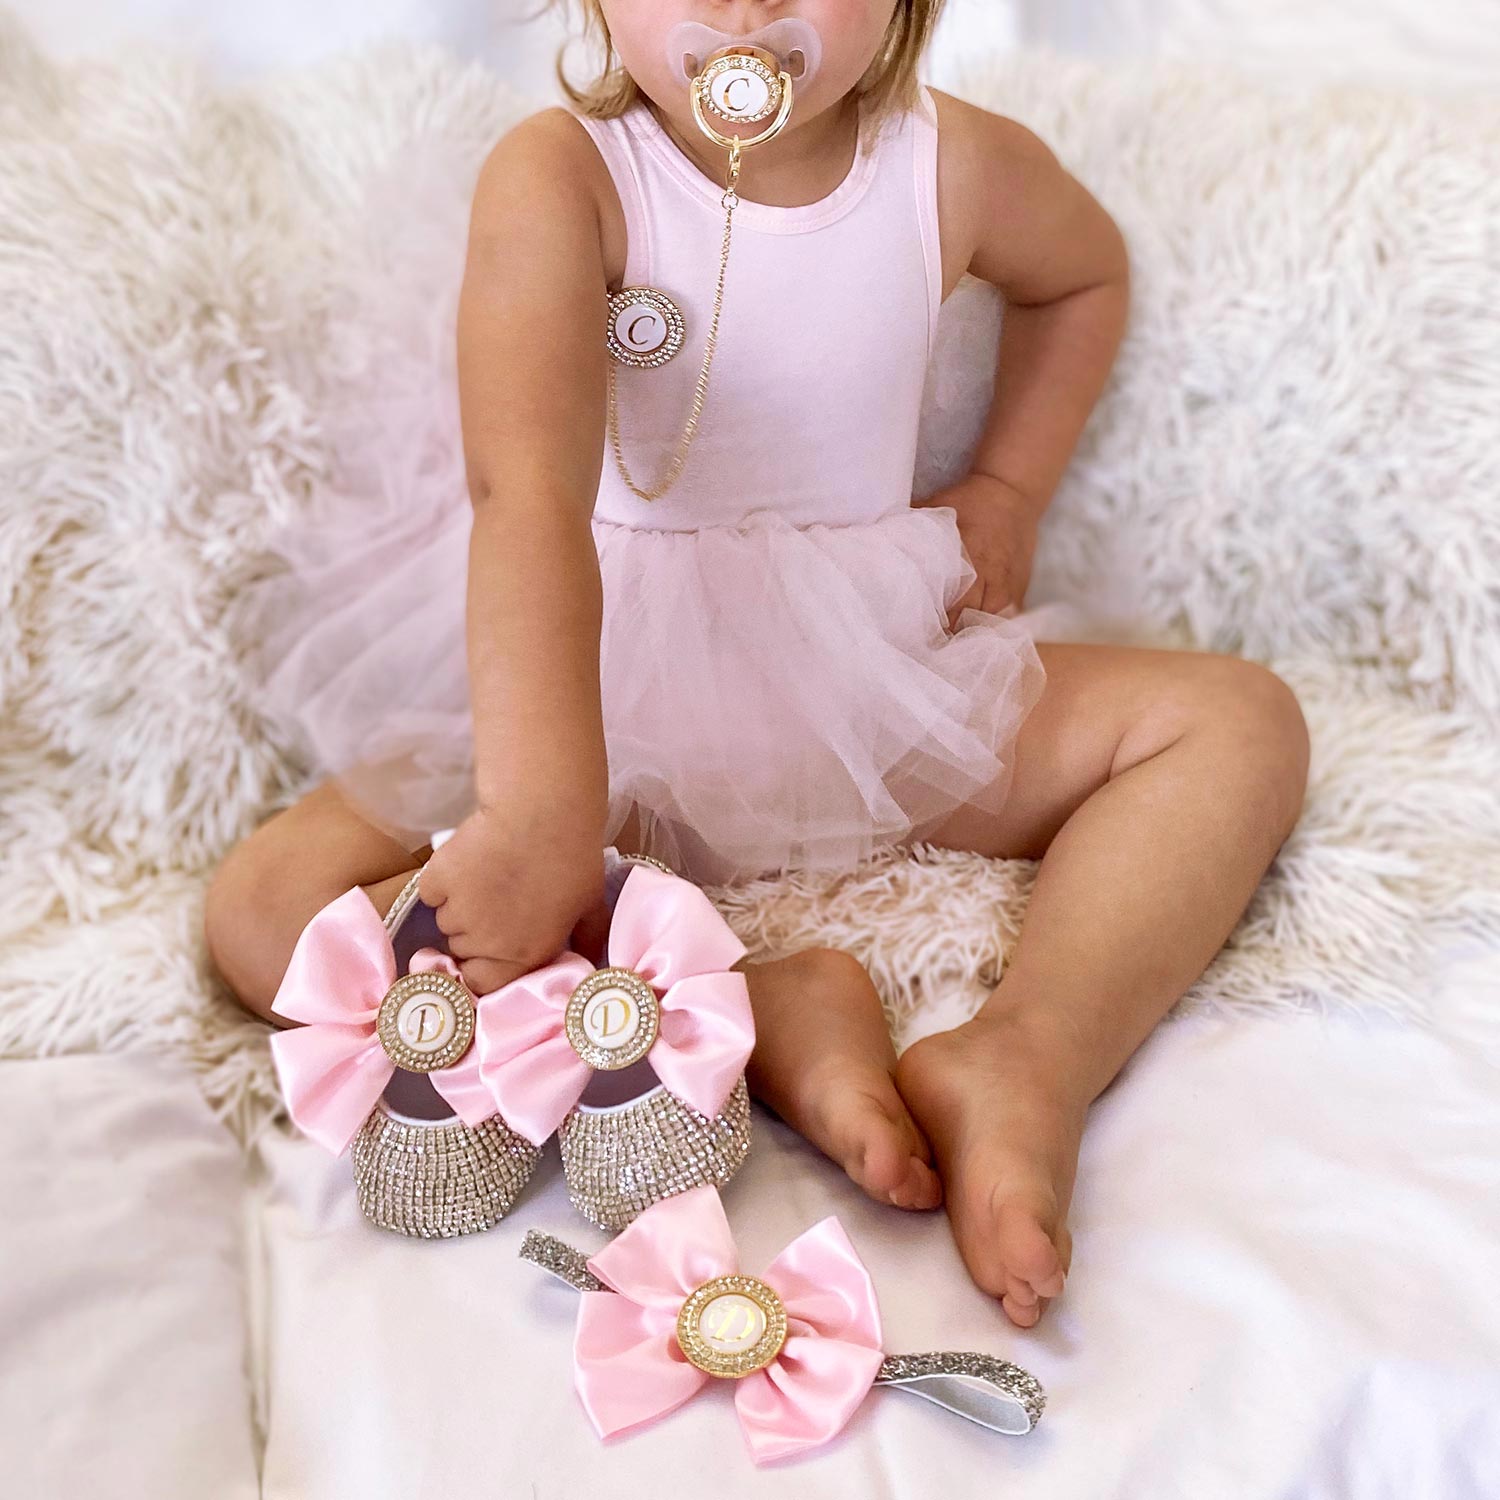 Personalized baby shoes with initial, custom headband (add-on) - pink